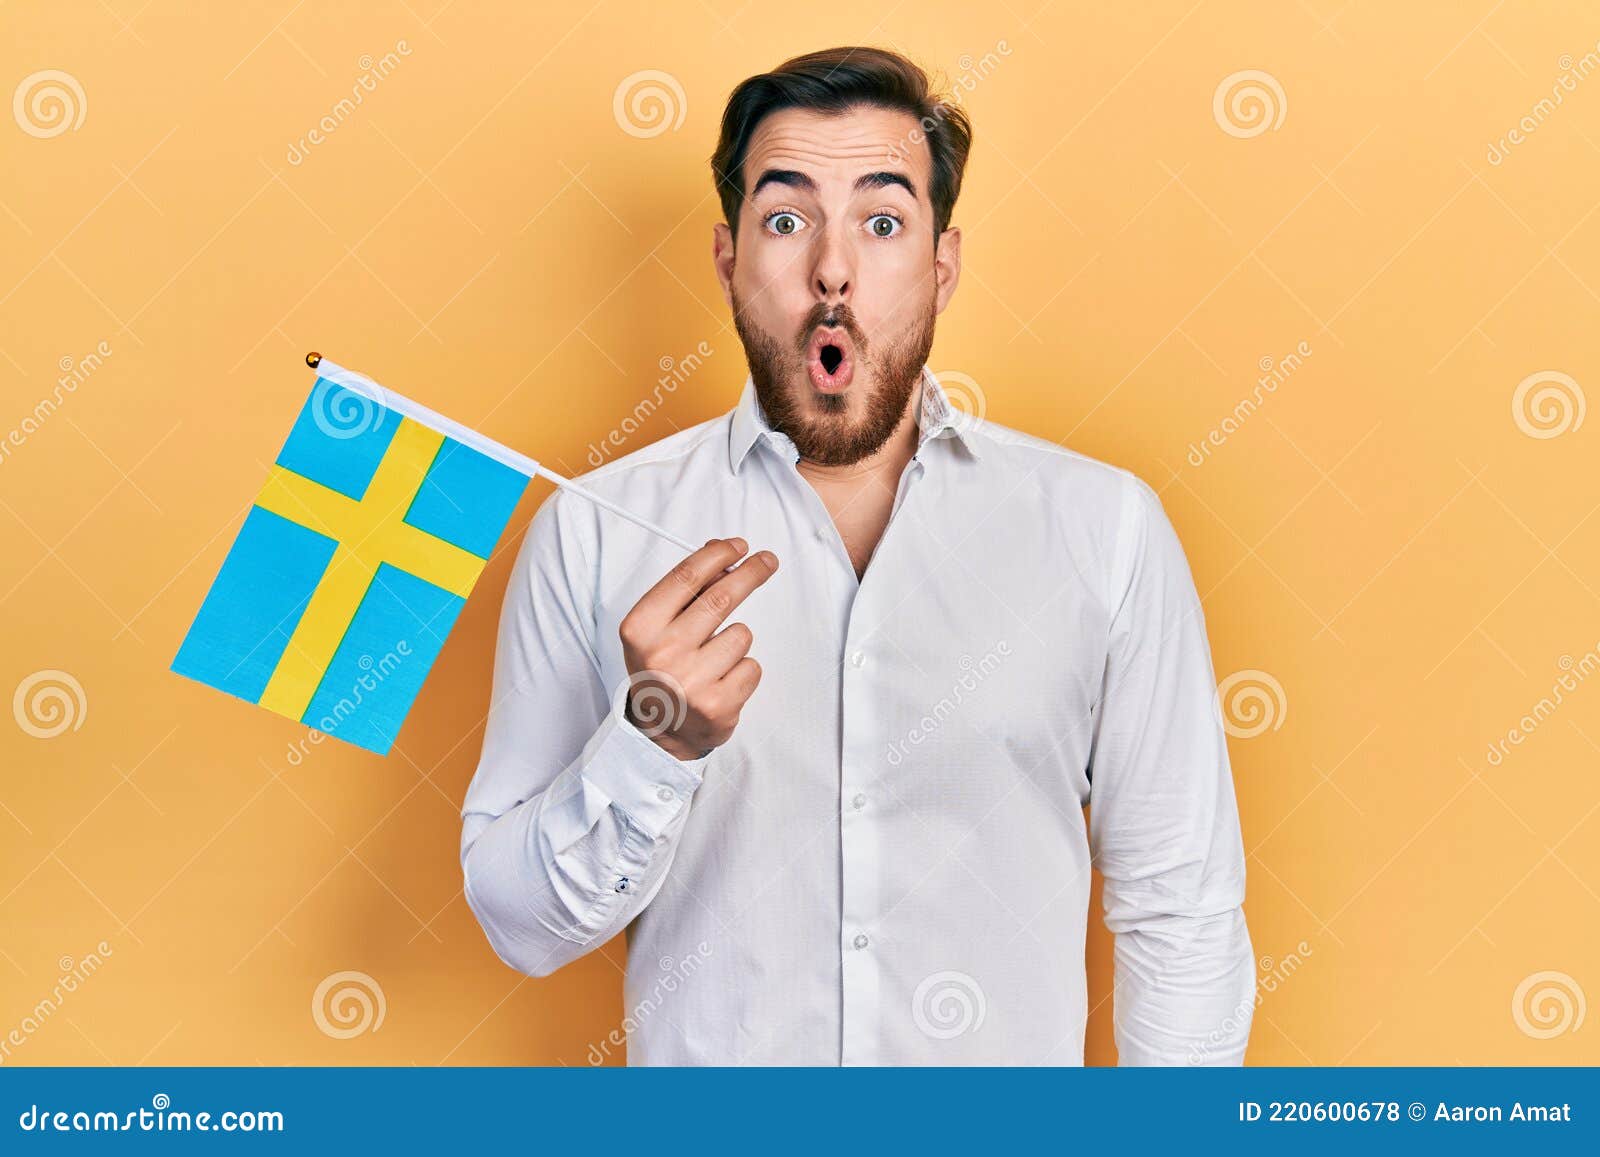 Handsome Caucasian Man with Beard Holding Sweden Flag Scared and Amazed ...